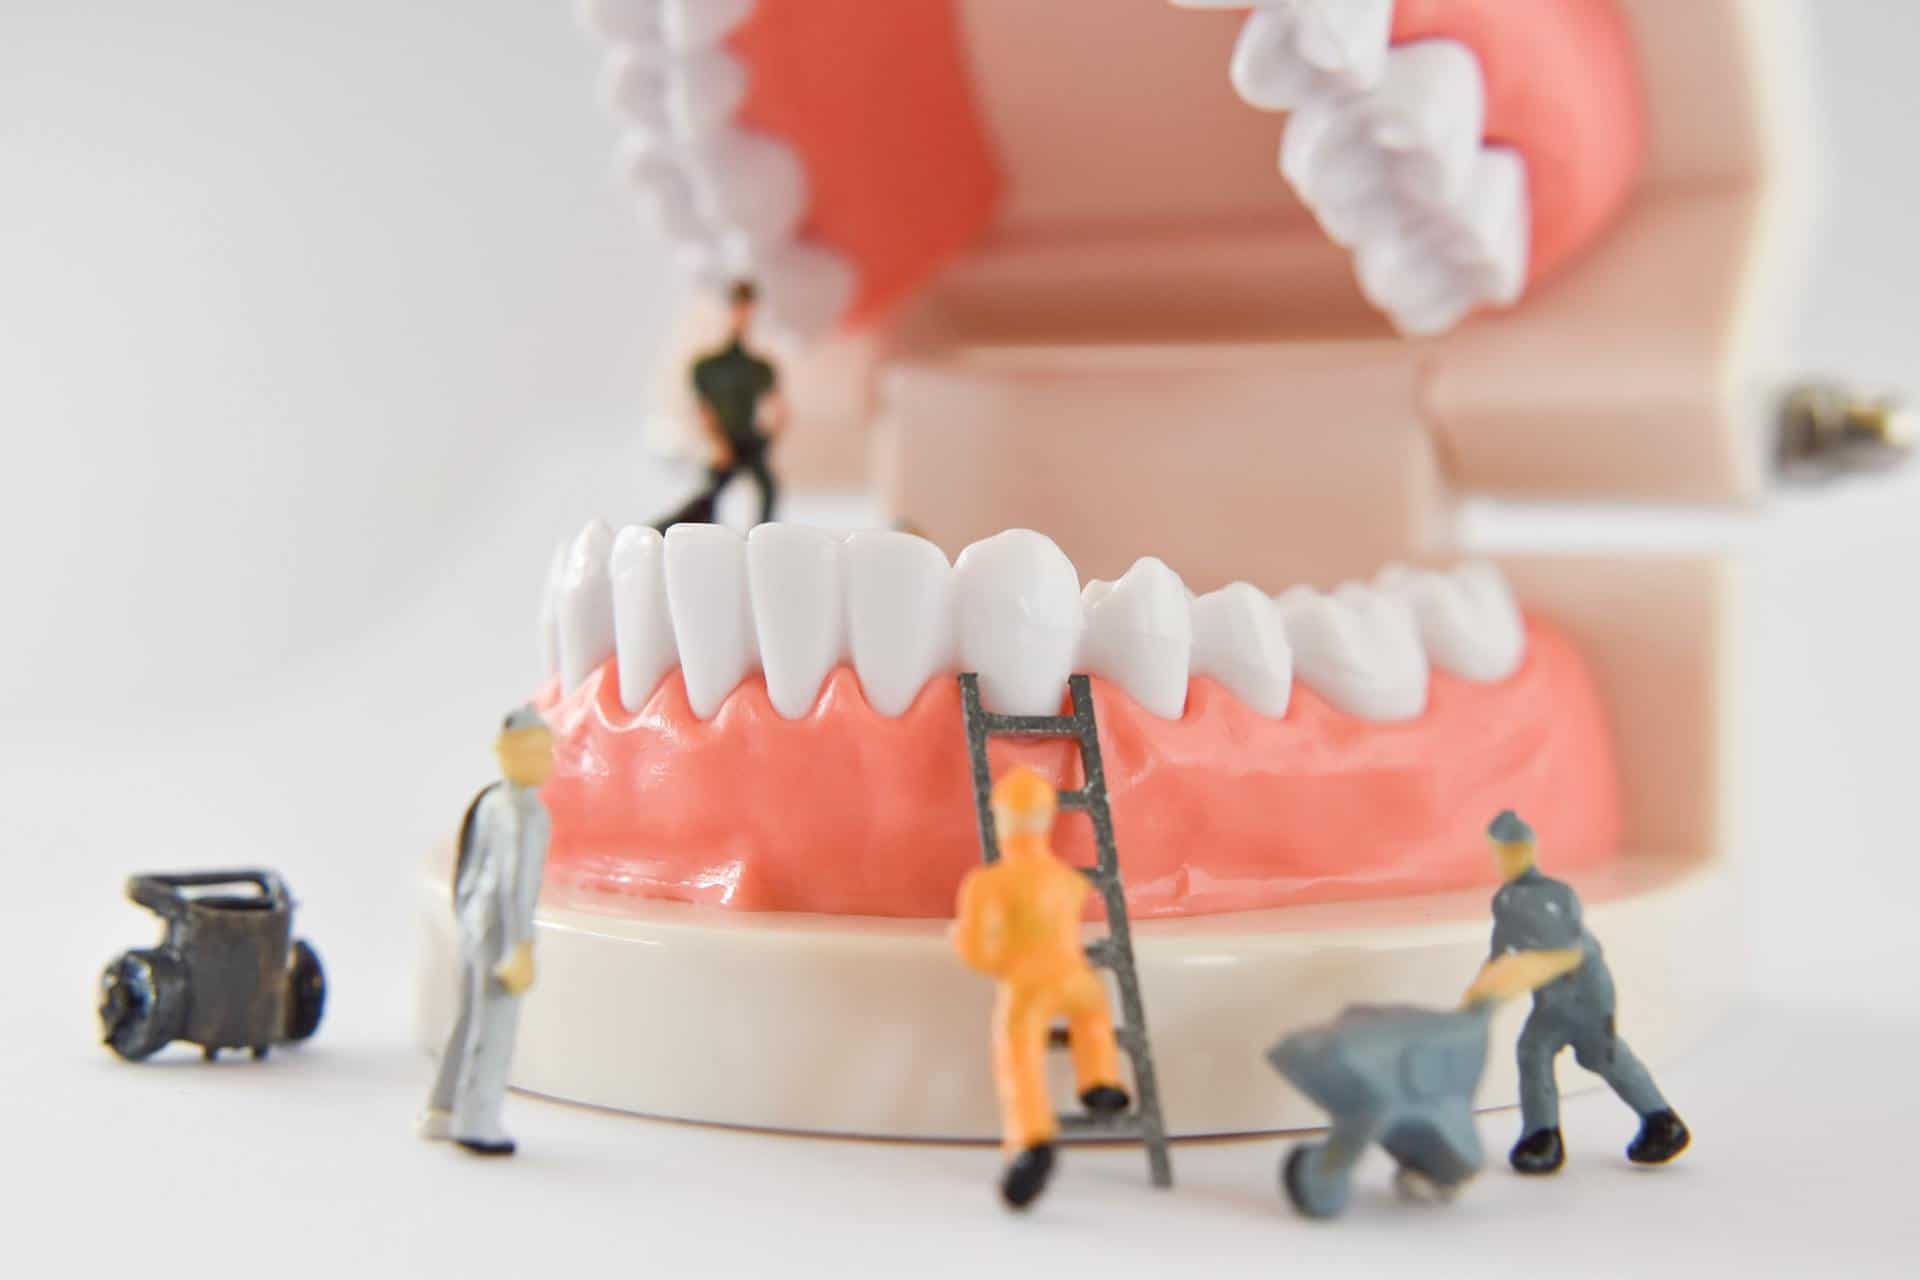 miniature people to repair a tooth or worker cleaning tooth model as medical and healthcare